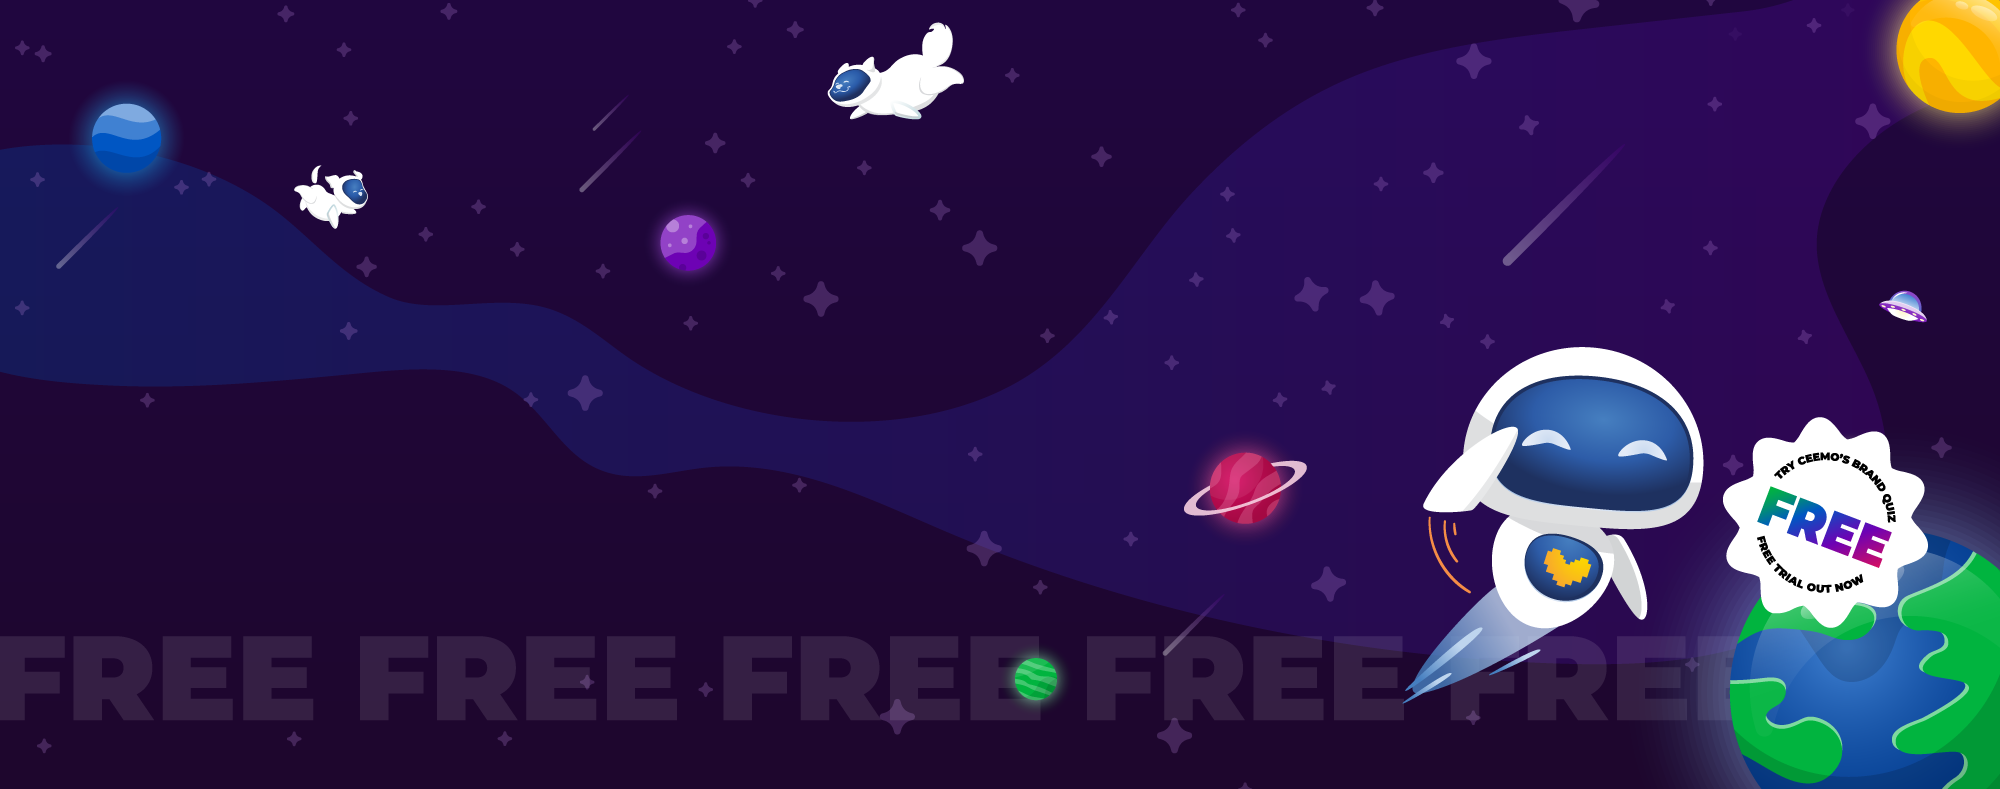 An illustrated space landscape, filled with stars, colorful planets, and shooting stars. Ceemo the robot is flying past the Earth, smiling & saluting at the viewer. His two robot dog friends are floating peacefully through space, chasing planets. There's subtle text that reads "Free free free free" along the bottom edge, and a badge on the right that reads, "Try Ceemo's Brand Quiz FREE! Free trial out now."